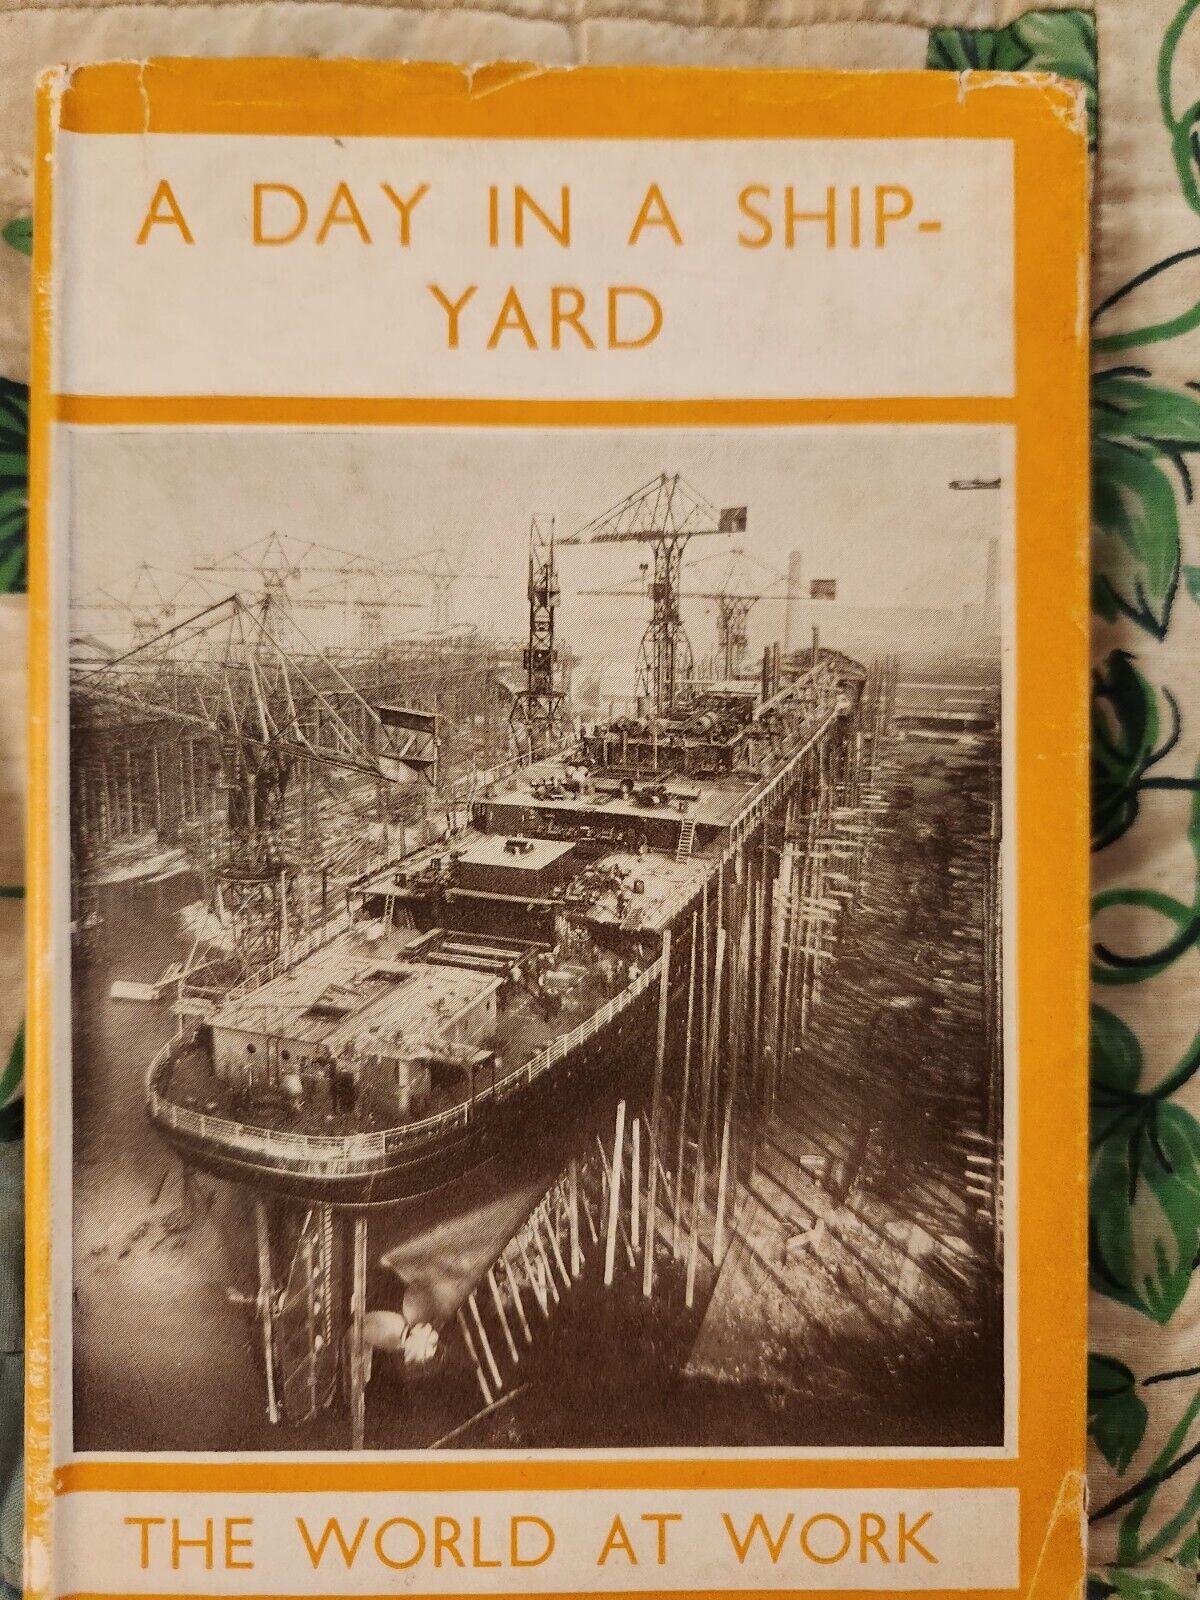 Titanic \' A Day In A Shipyard \' by Arthur Cooke, includes Titanic Photos